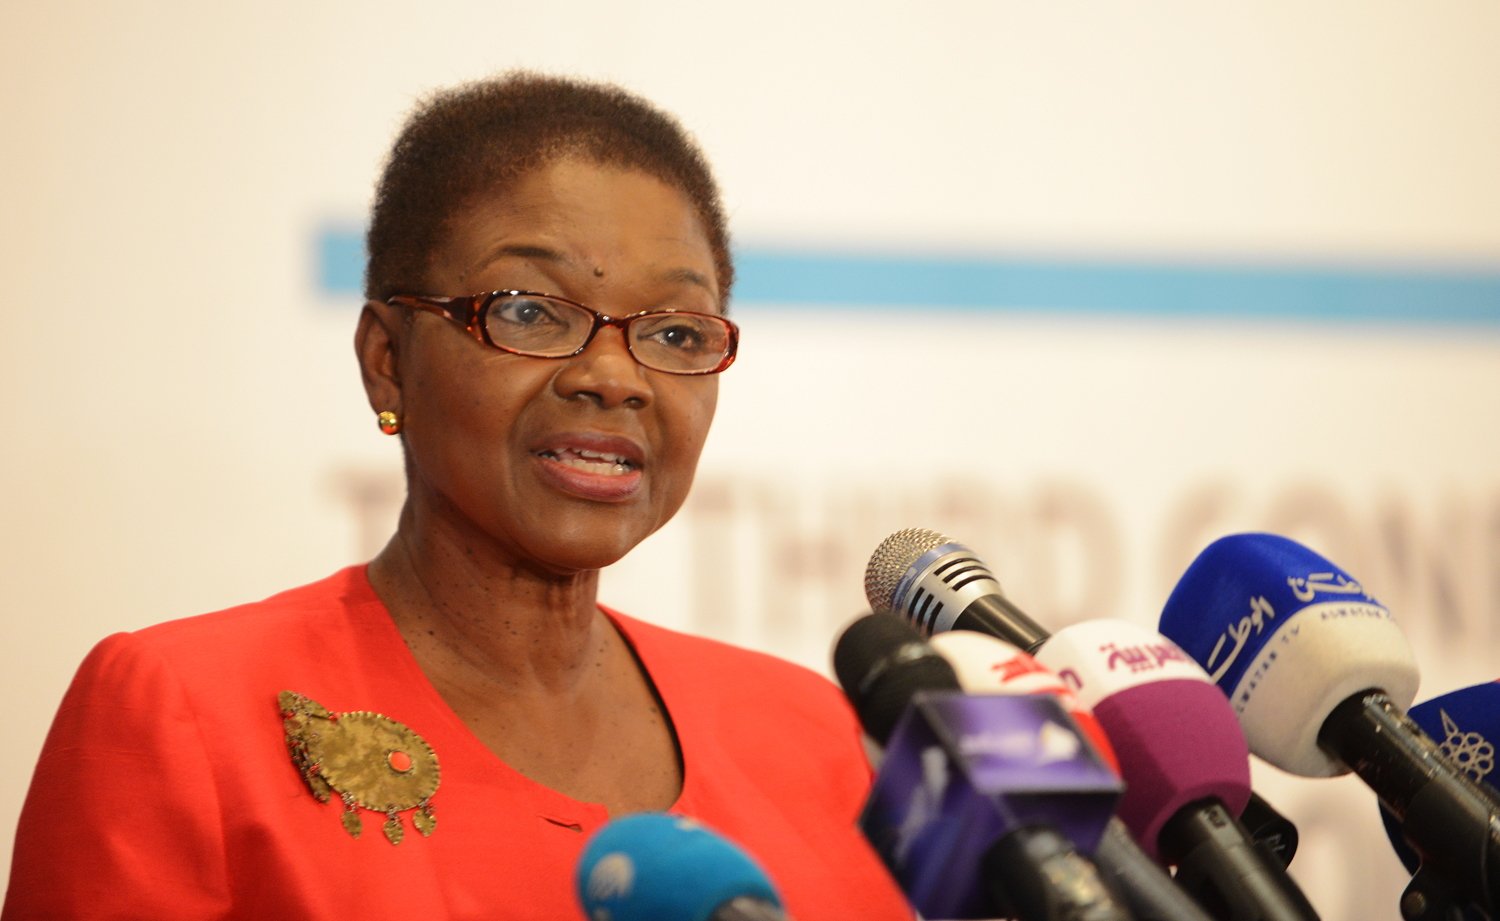 UN Under Secretary General for Humanitarian Affairs and Emergency Relief coordinator Valerie Amos